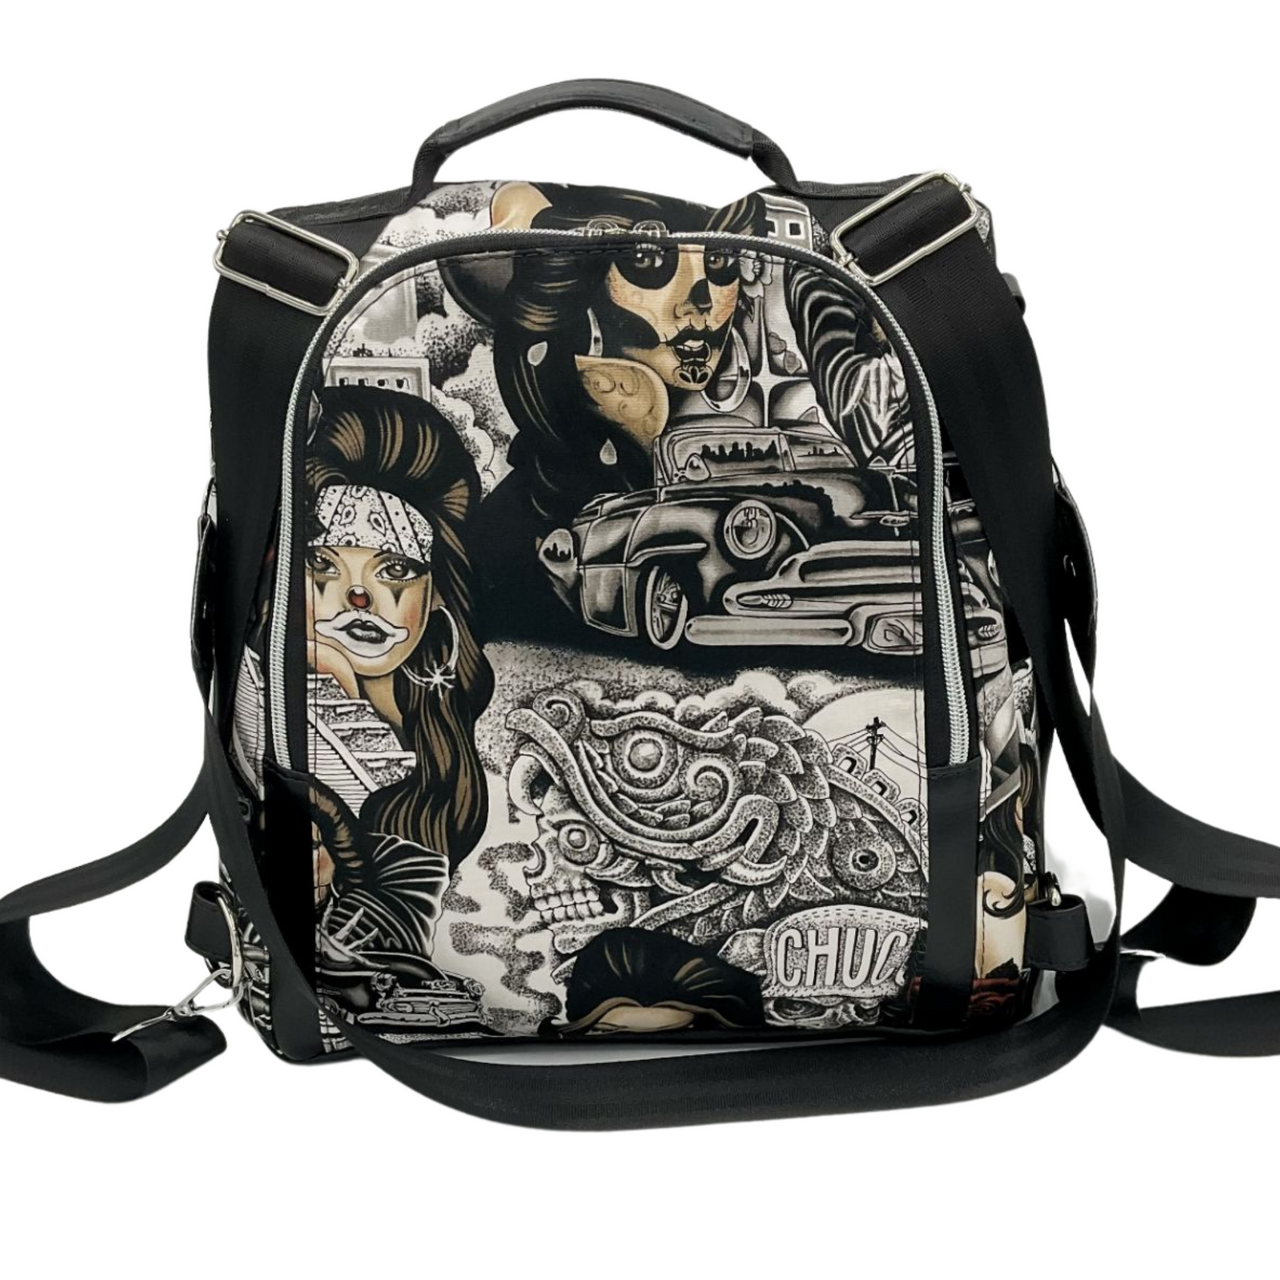 Chuco Convertible Backpack